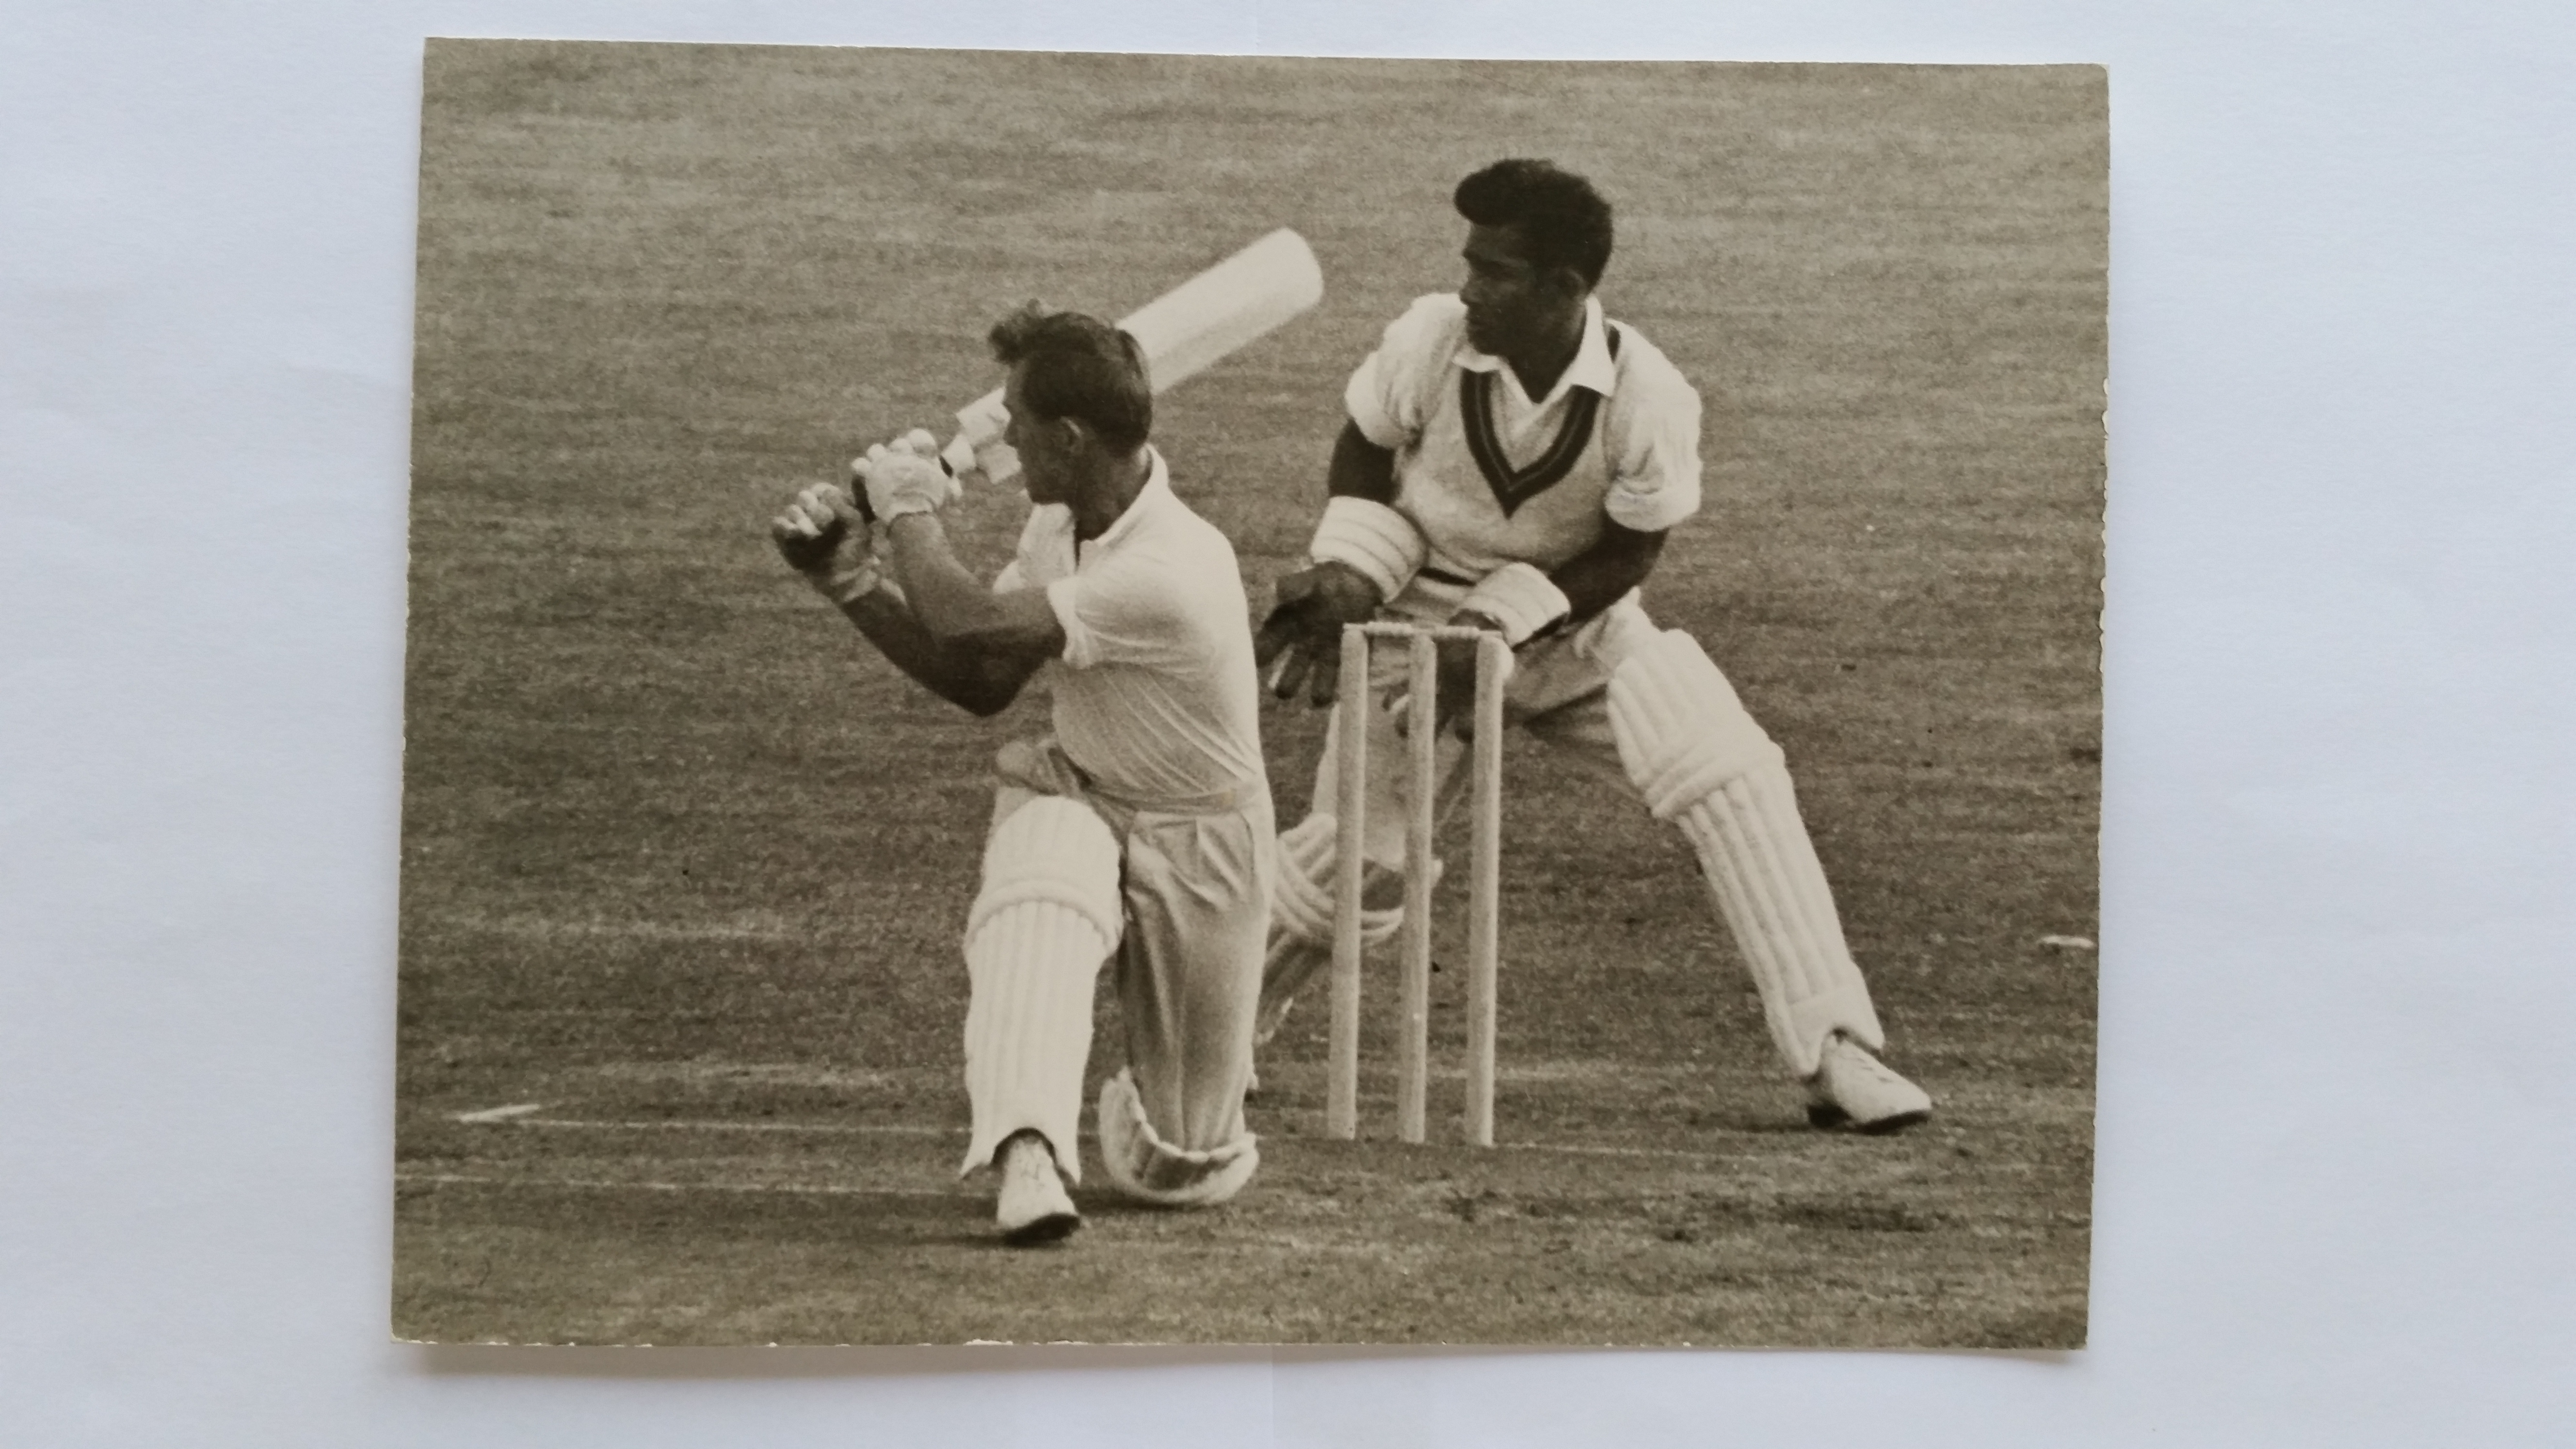 CRICKET, press photos, West Indies in England, 1957, showing May & Richardson batting, press stamp